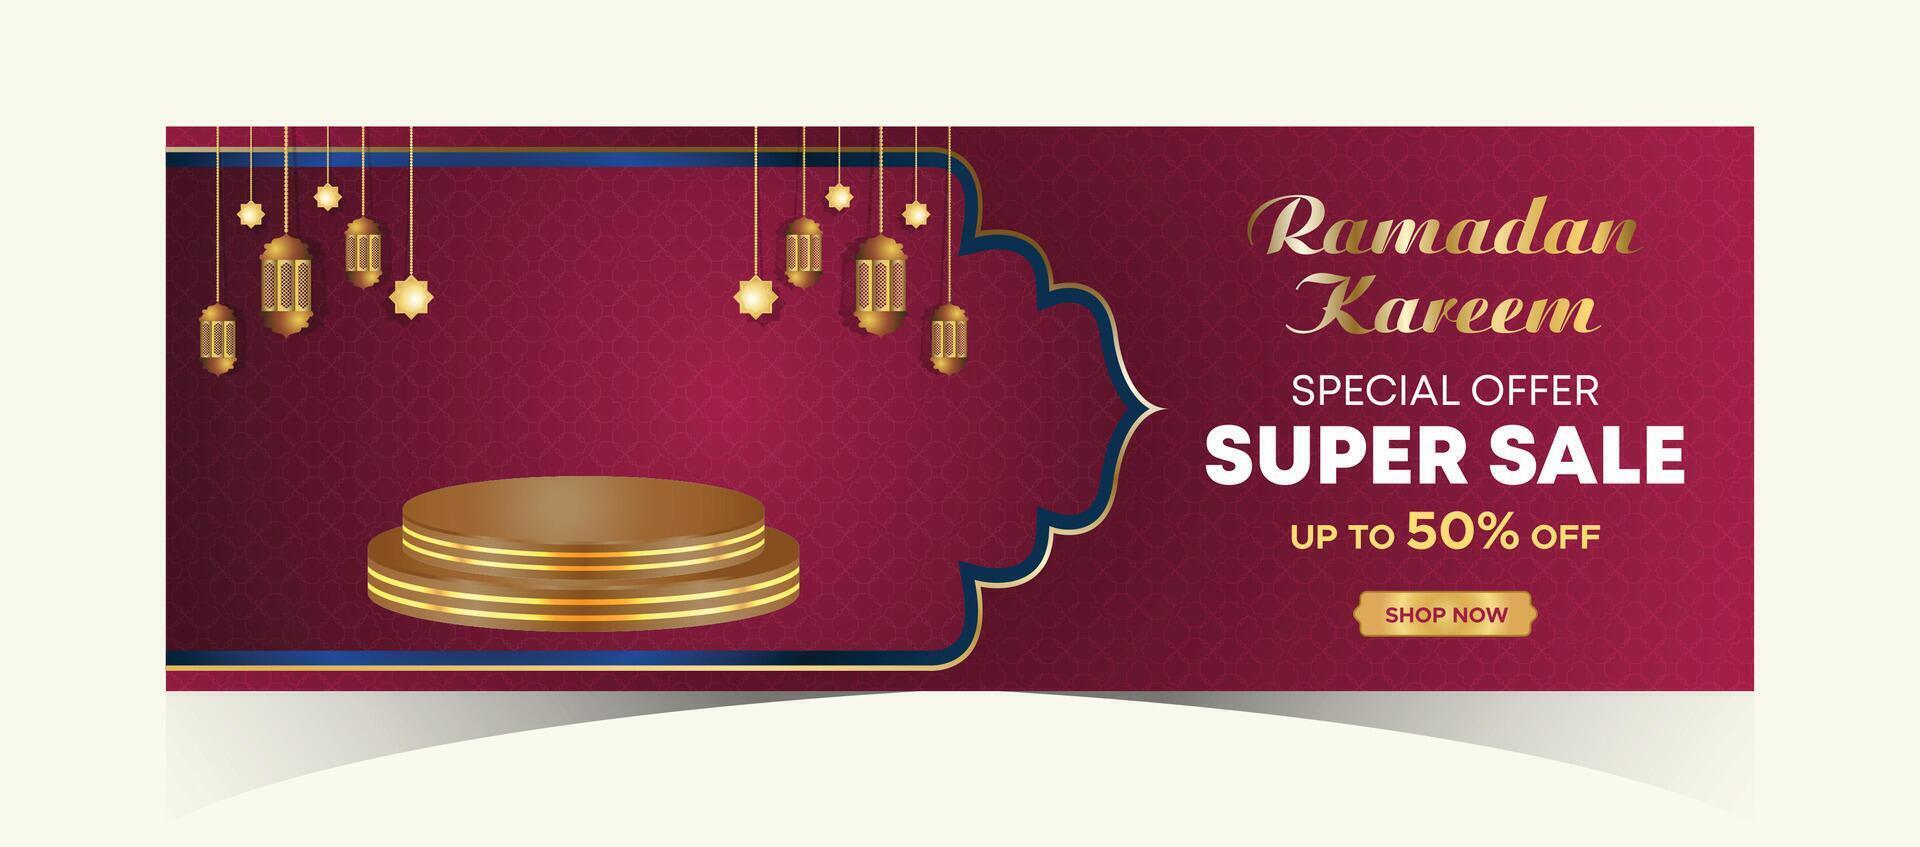 Ramadan Kareem Web Background Super Sale Banner with Podium for Display of product. Ramadan Mega Big Sale Promotion Poster and Social Media Post. Islamic Special Offer Promotion Banner Design Template vector